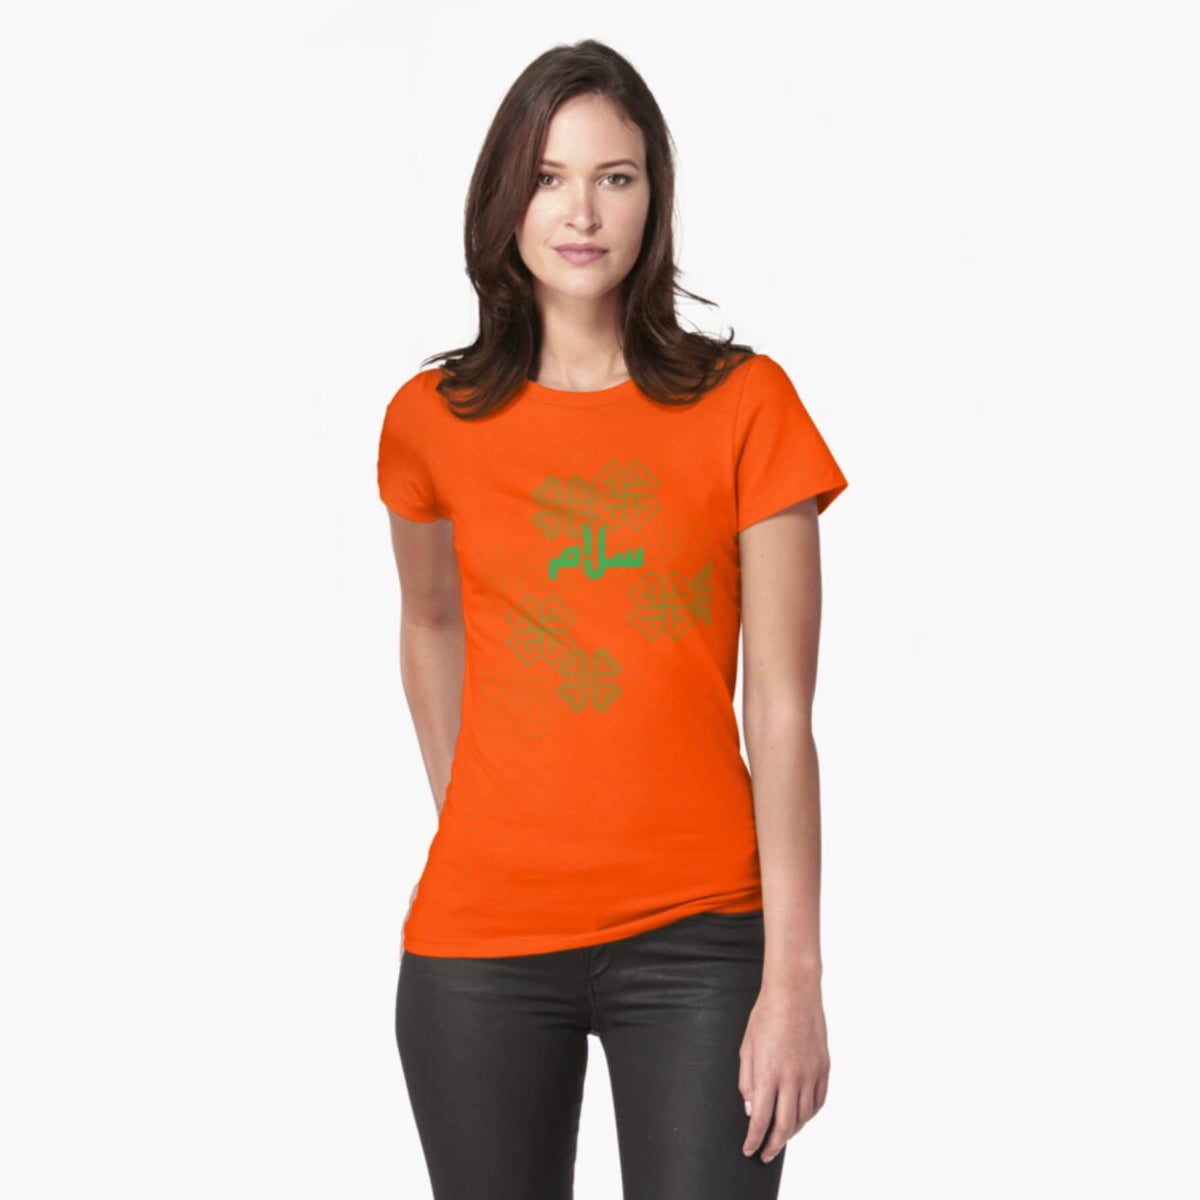 A white female model with hazel eyes and mid-brown shoulder length hair wears the Haluna Happy Names exclusive &#39;Salaam—Arabic Key Words&#39; design bright orange loosely fitted t-shirt and a pair of tight black jeans. The word &#39;salaam&#39; is written on the tshirt in green in Arabic using a kufic-style font, across the chest of the model against a complementary green patterned background print. The tshirt ends at the woman&#39;s hips and the image cuts off mid-thigh.